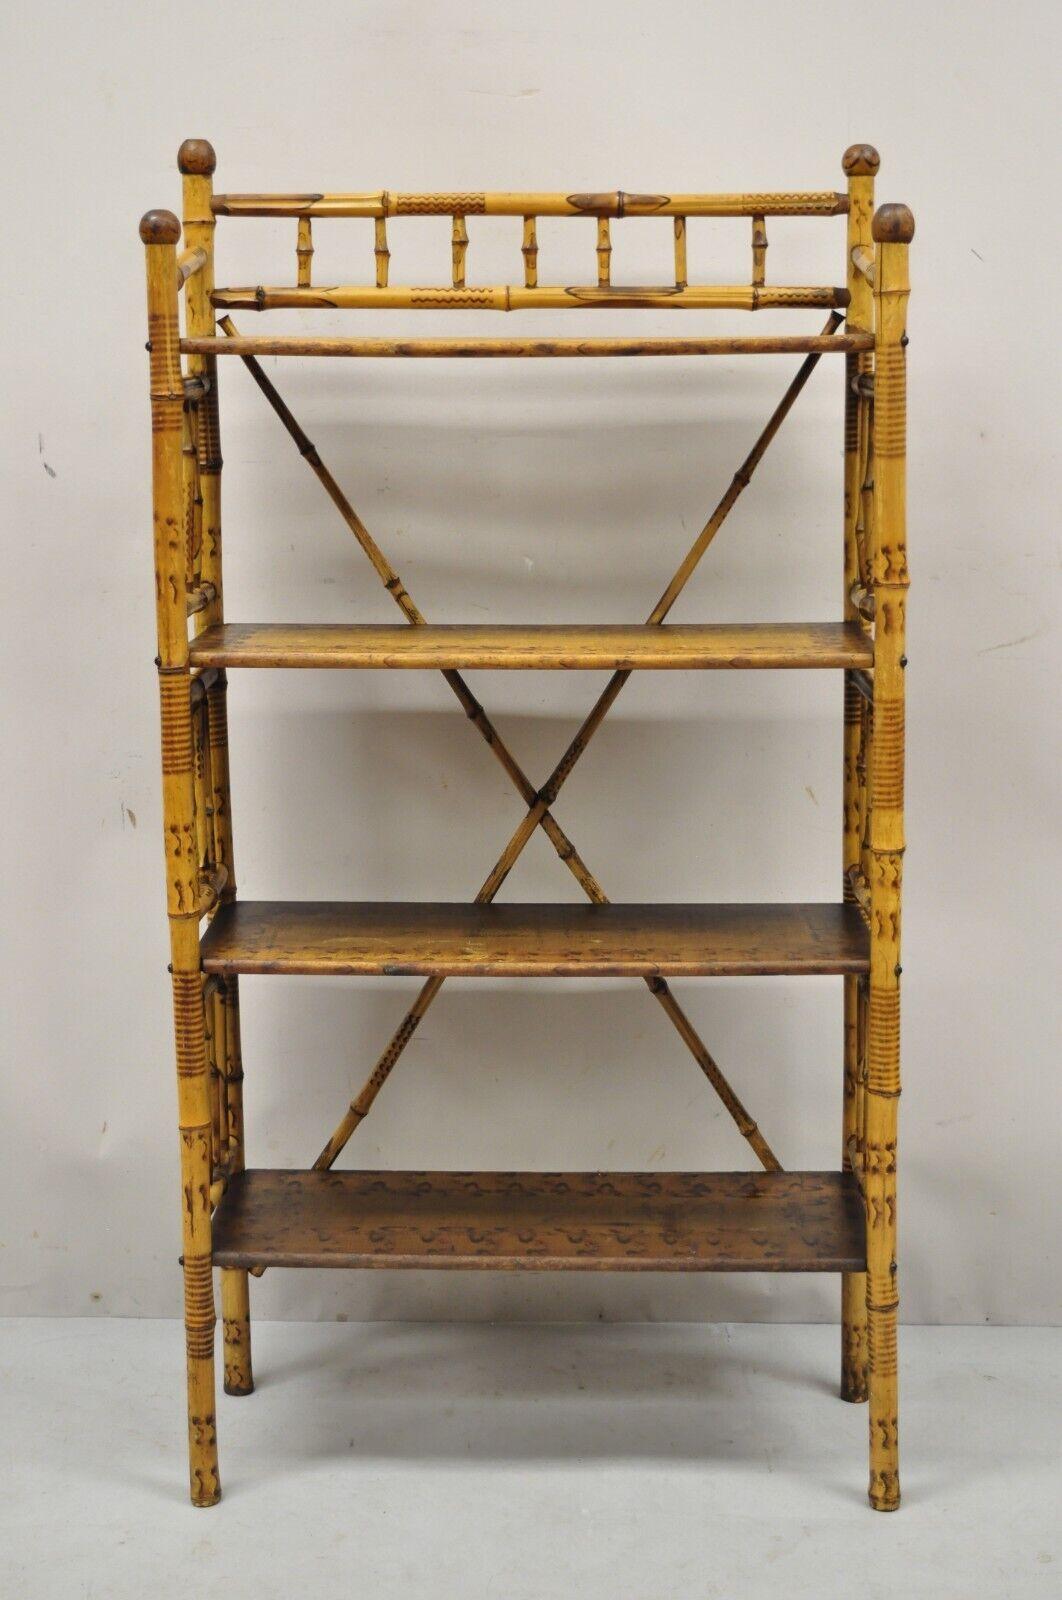  Antique English Victorian Bamboo Stick and Ball Etagere Curio Display Shelf Stand. item features 4 tiers, burnt bamboo design, bamboo wooden frame, X-form stretcher, very nice antique item Circa 19th Century. Measurements: 47.5